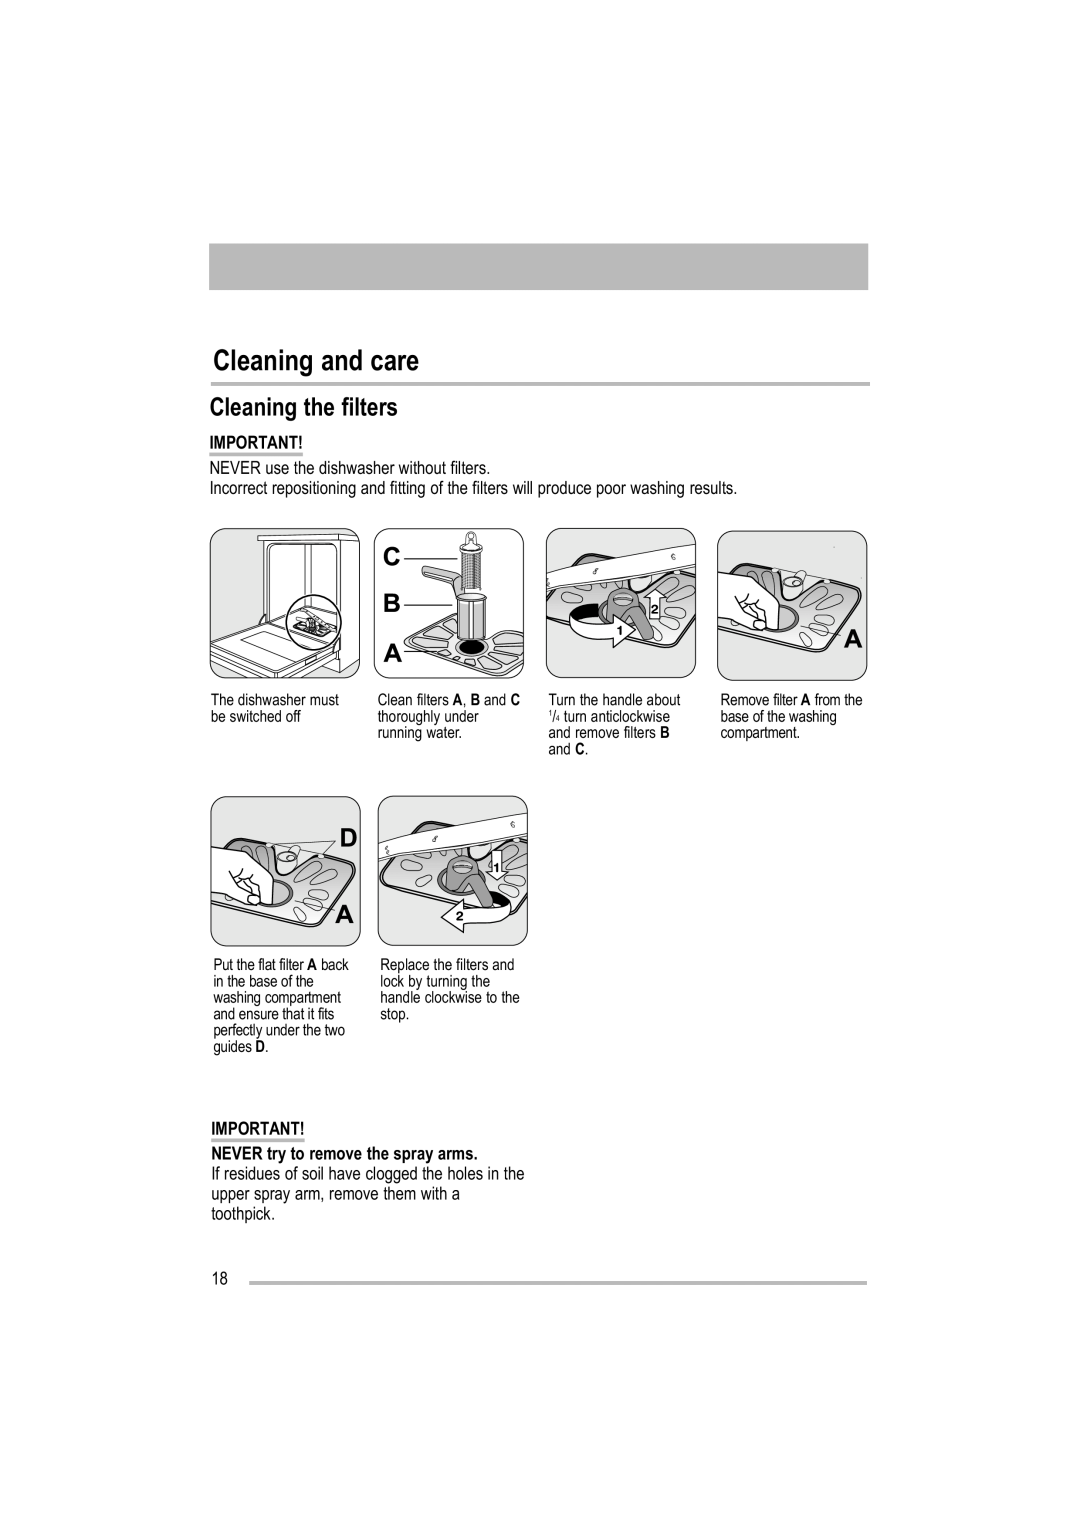 Electrolux ZDF 501 user manual Cleaning and care, Cleaning the filters, NEVER try to remove the spray arms 